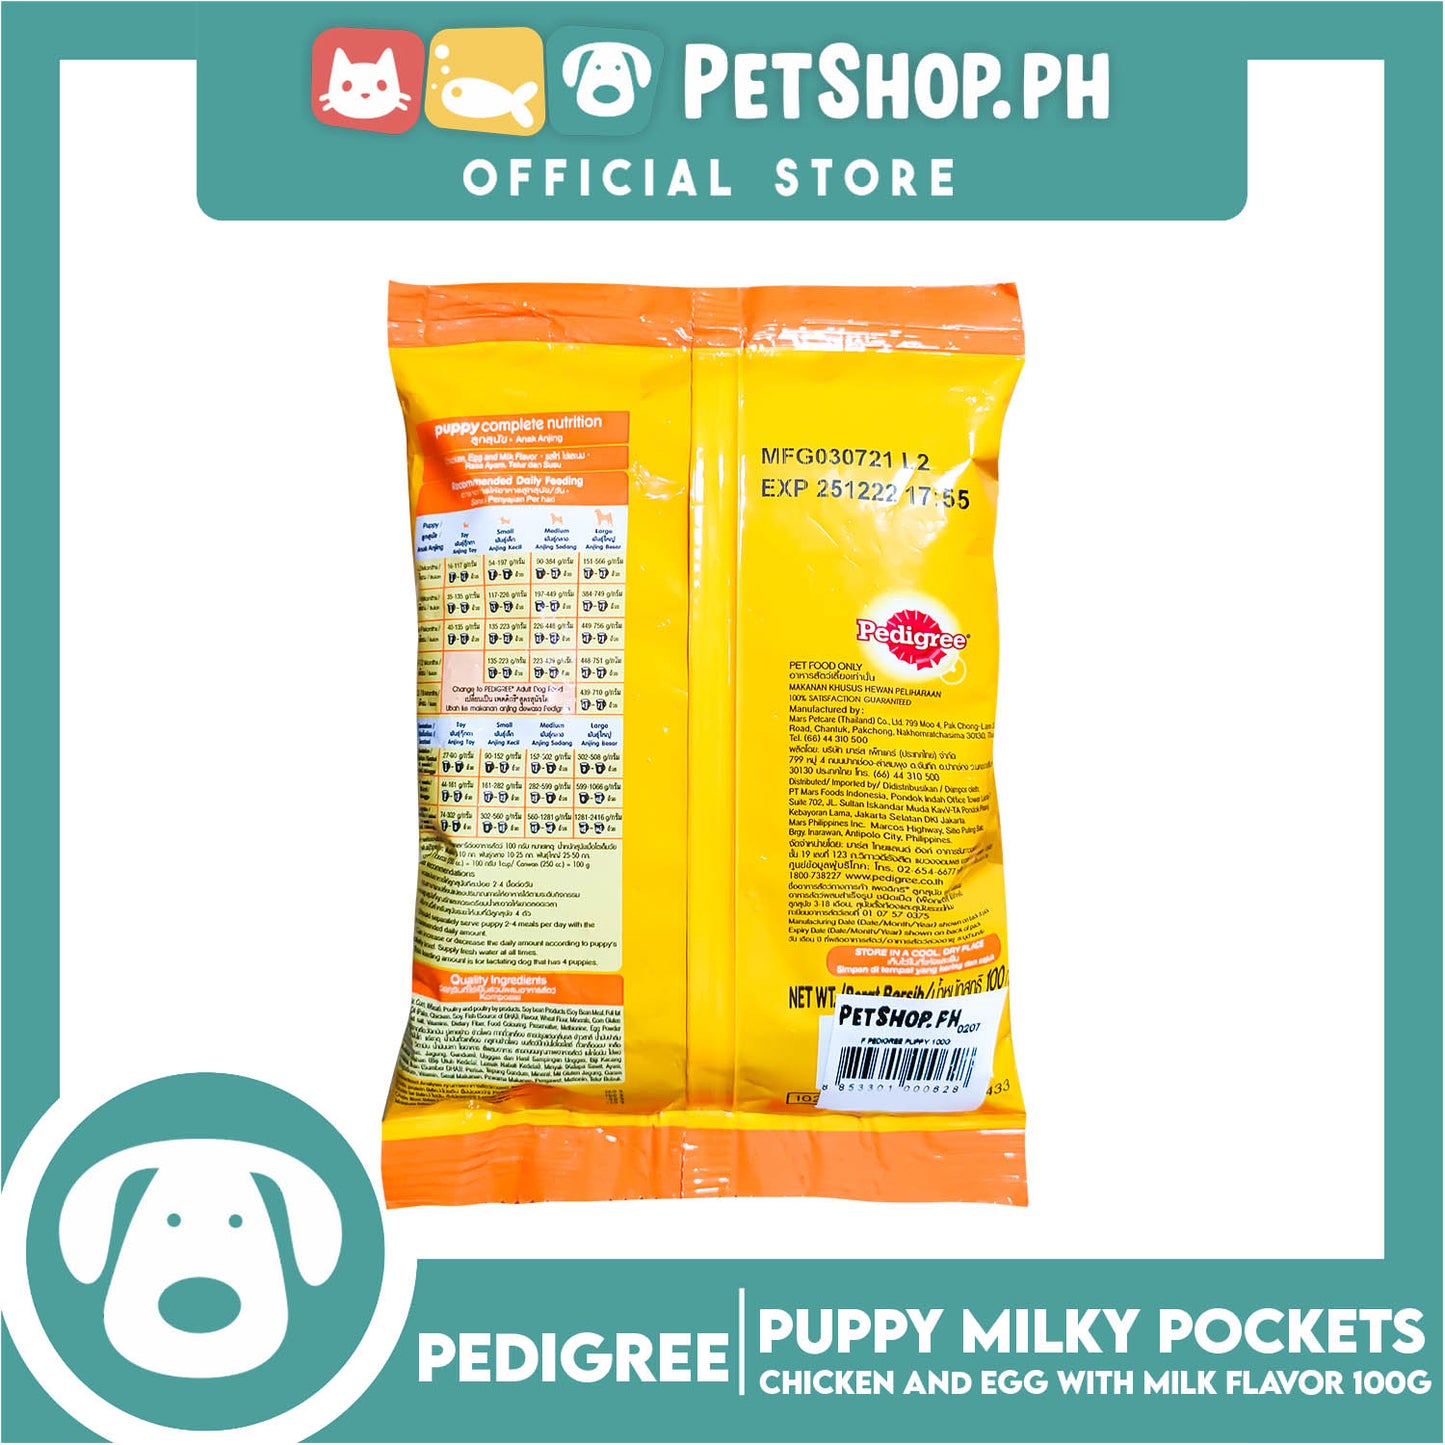 12pcs Pedigree Nutri Defense For Puppy Chicken, Egg And Milk Flavor 100g (Stage 2 For 3-18 Months) Milky Pockets, Dog Dry Food